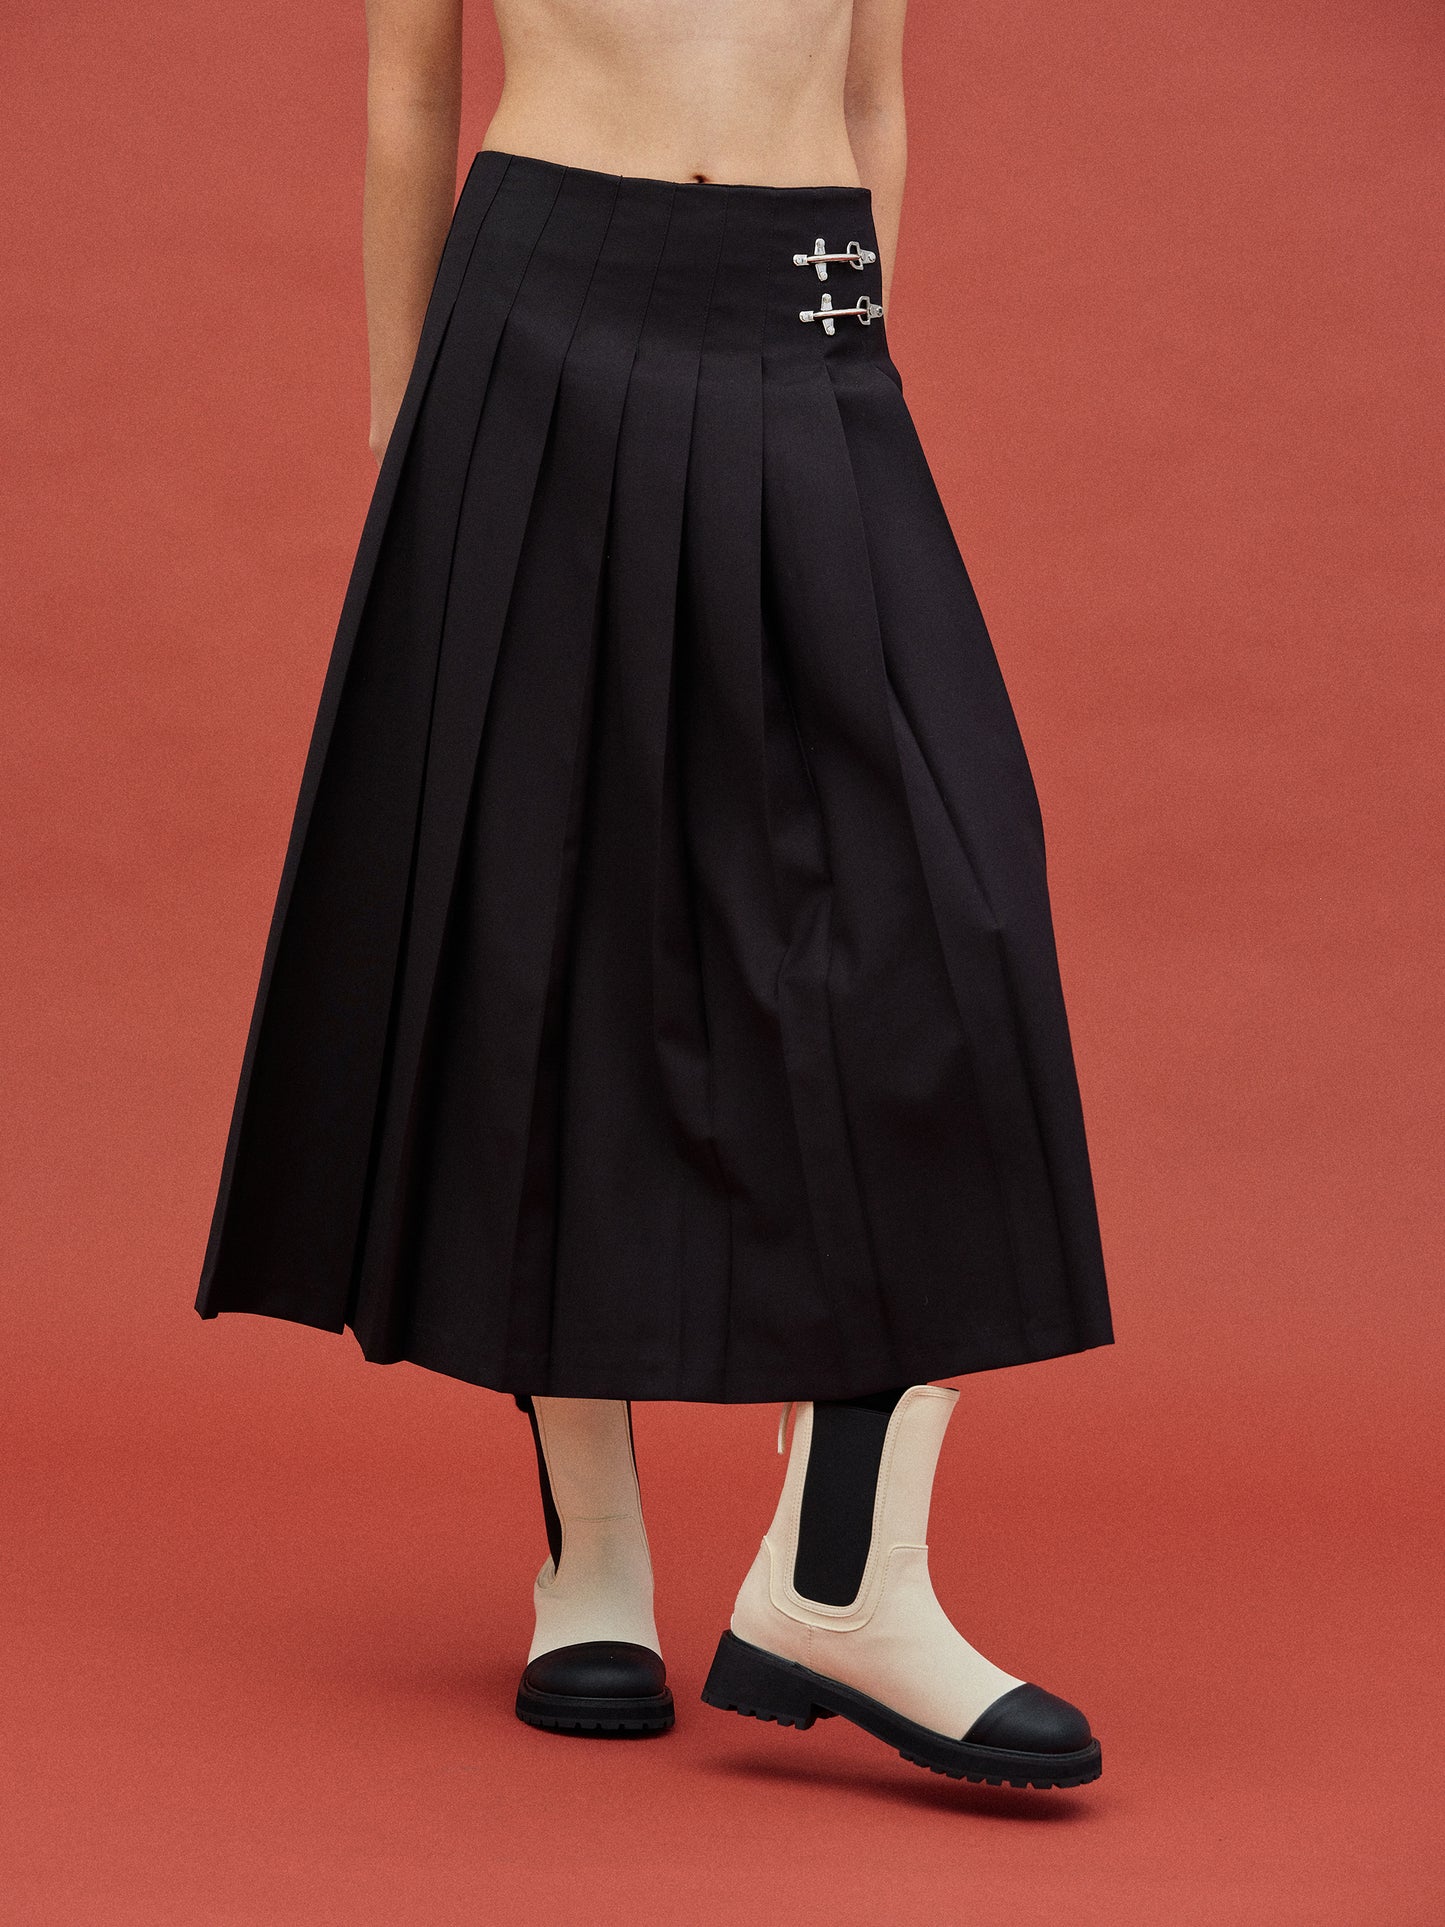 Black Wool Box Pleated Skirt, High Waisted, Mid Made To , 42% OFF